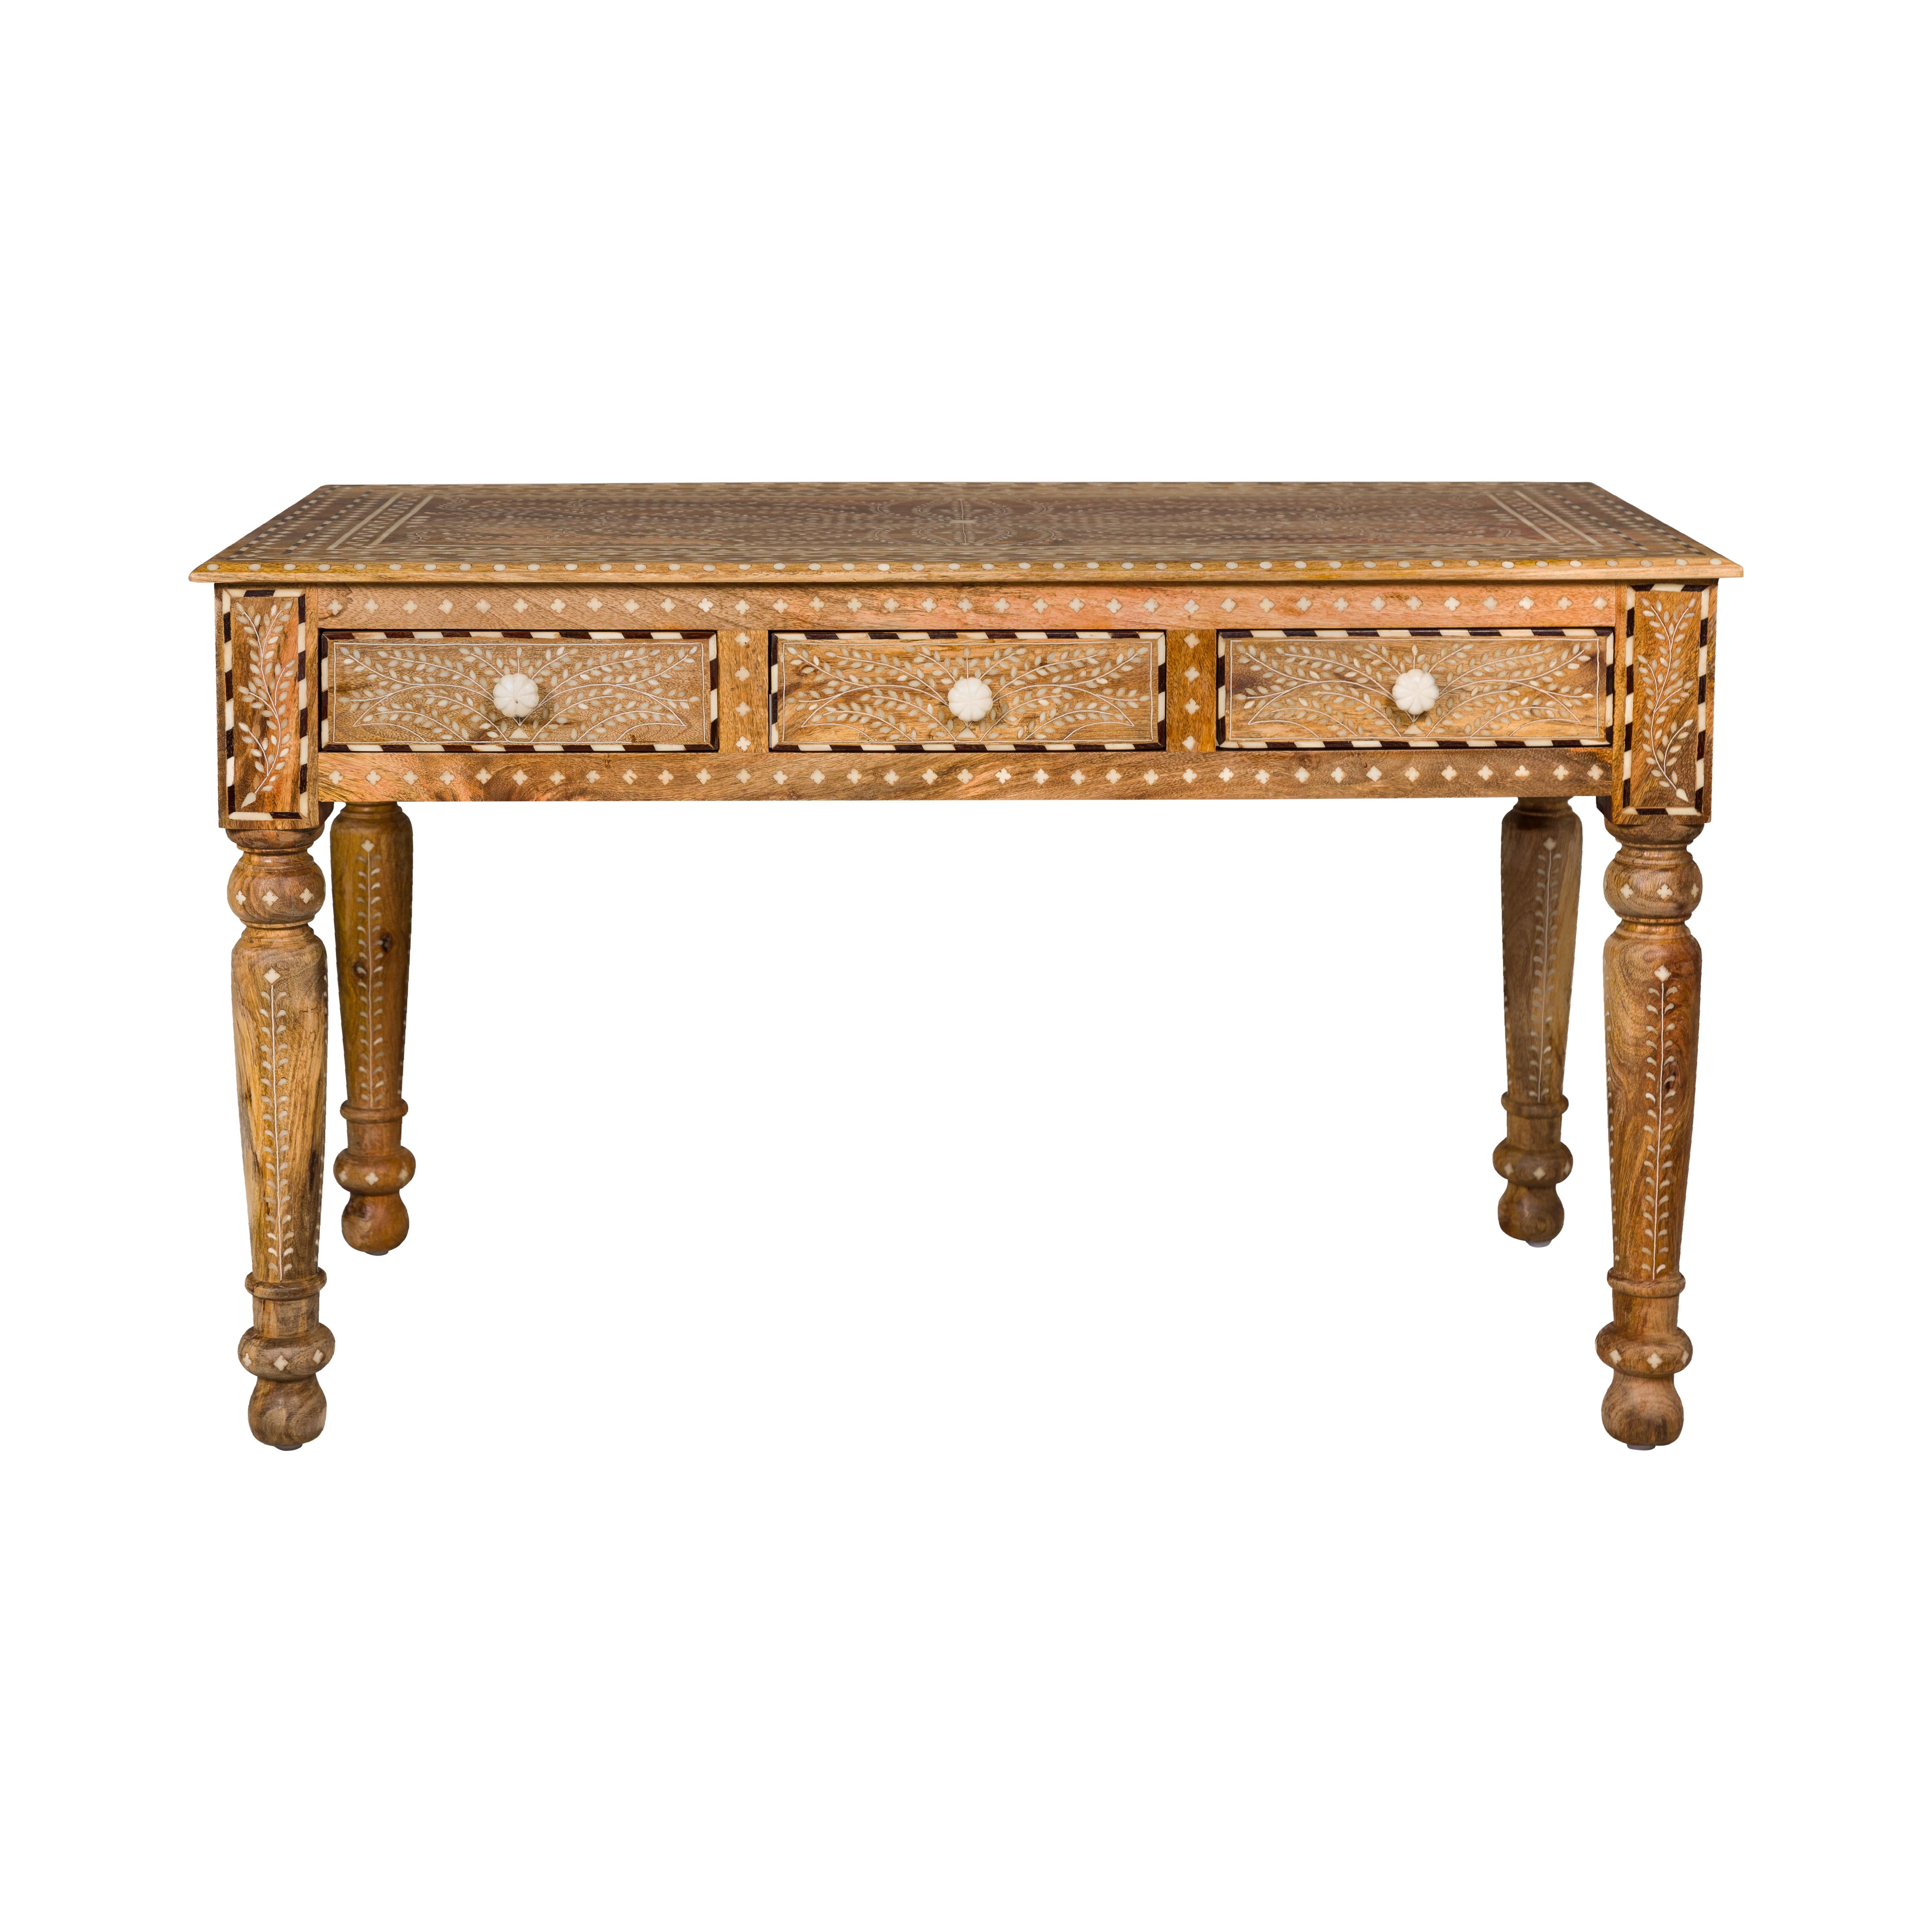 Anglo Indian Style Mango Wood Desk with Drawers, Bone Inlay and Light Patina For Sale 14